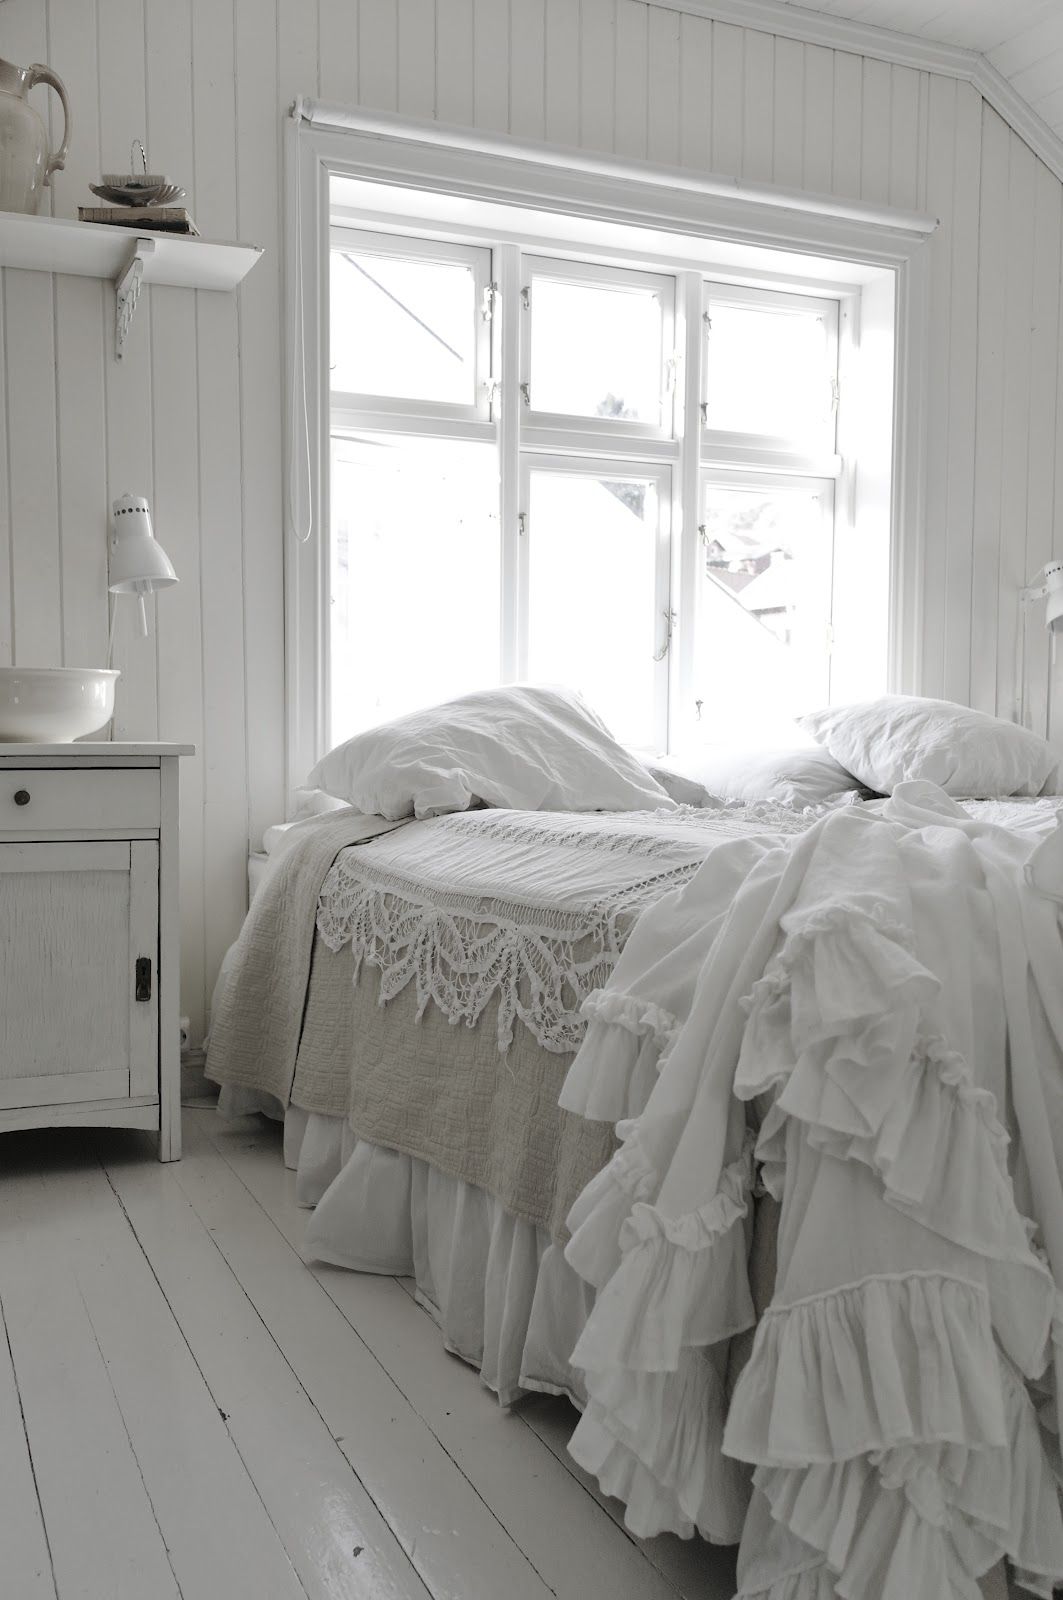 White and Wood Bedroom photo - 10